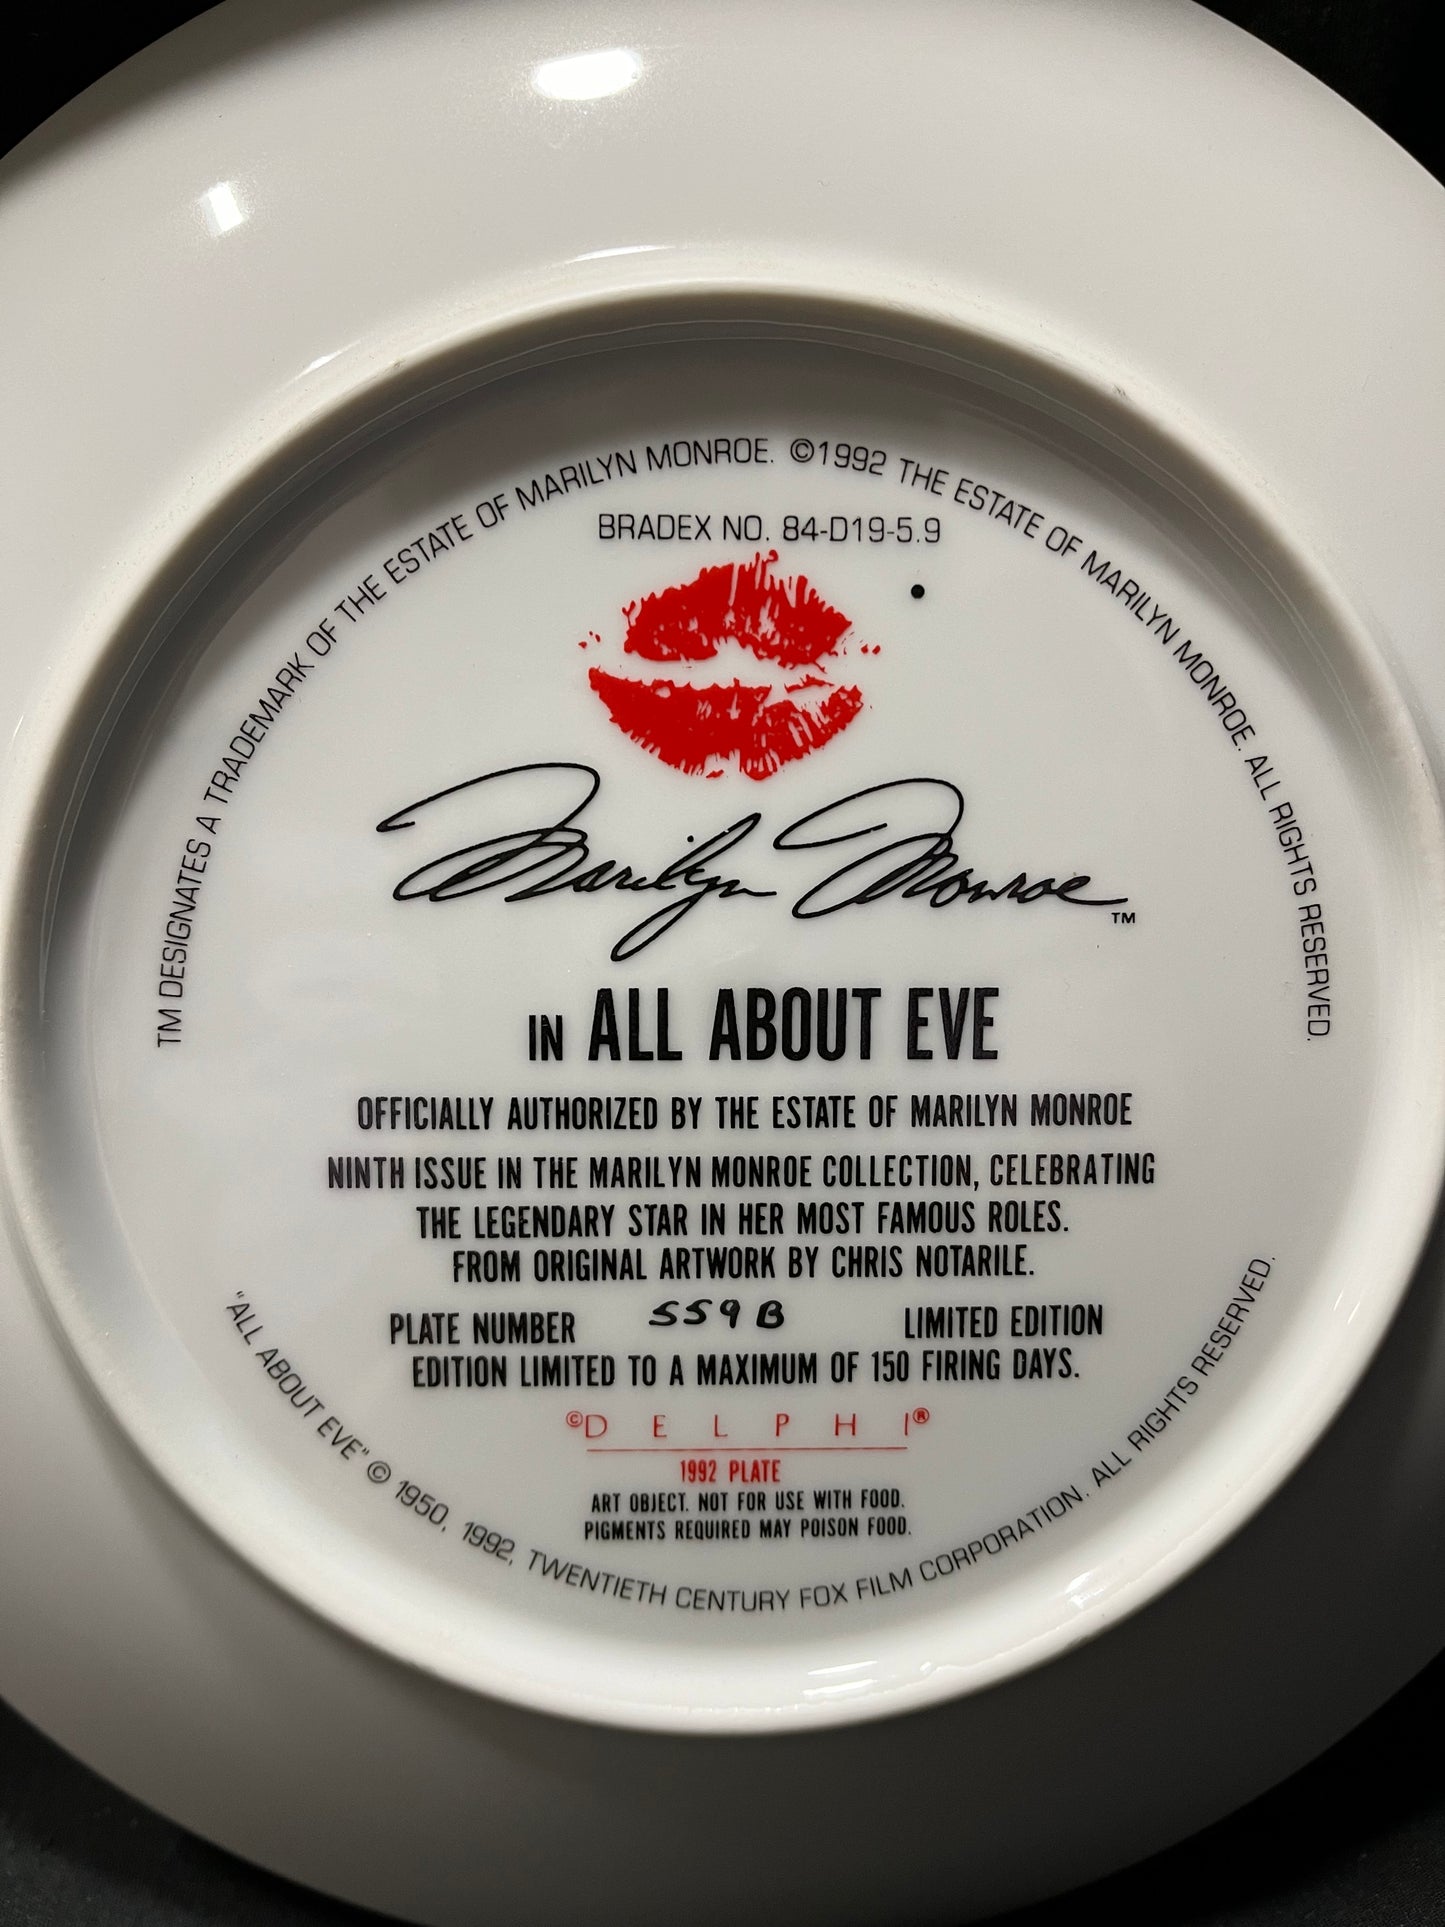 Marilyn Munroe Delphi 1992 "All About Eve" Plate for Bradford Exchange